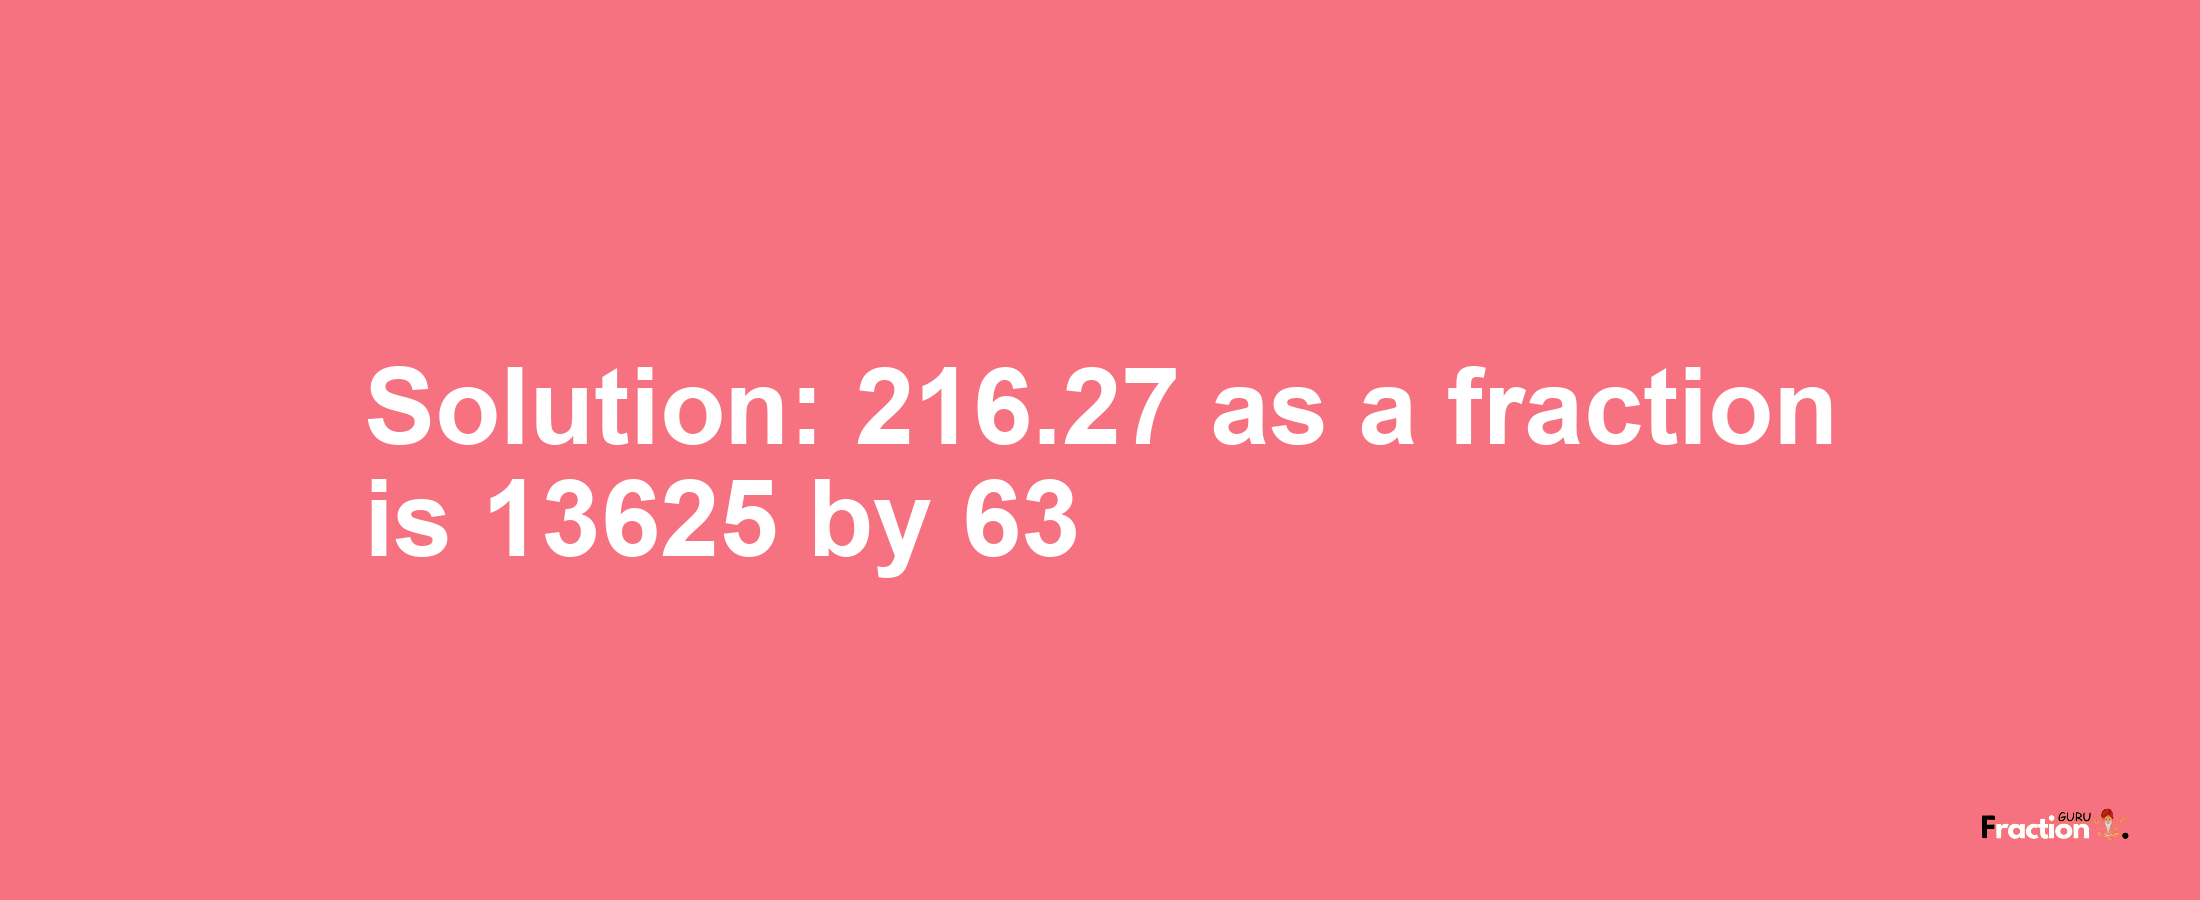 Solution:216.27 as a fraction is 13625/63